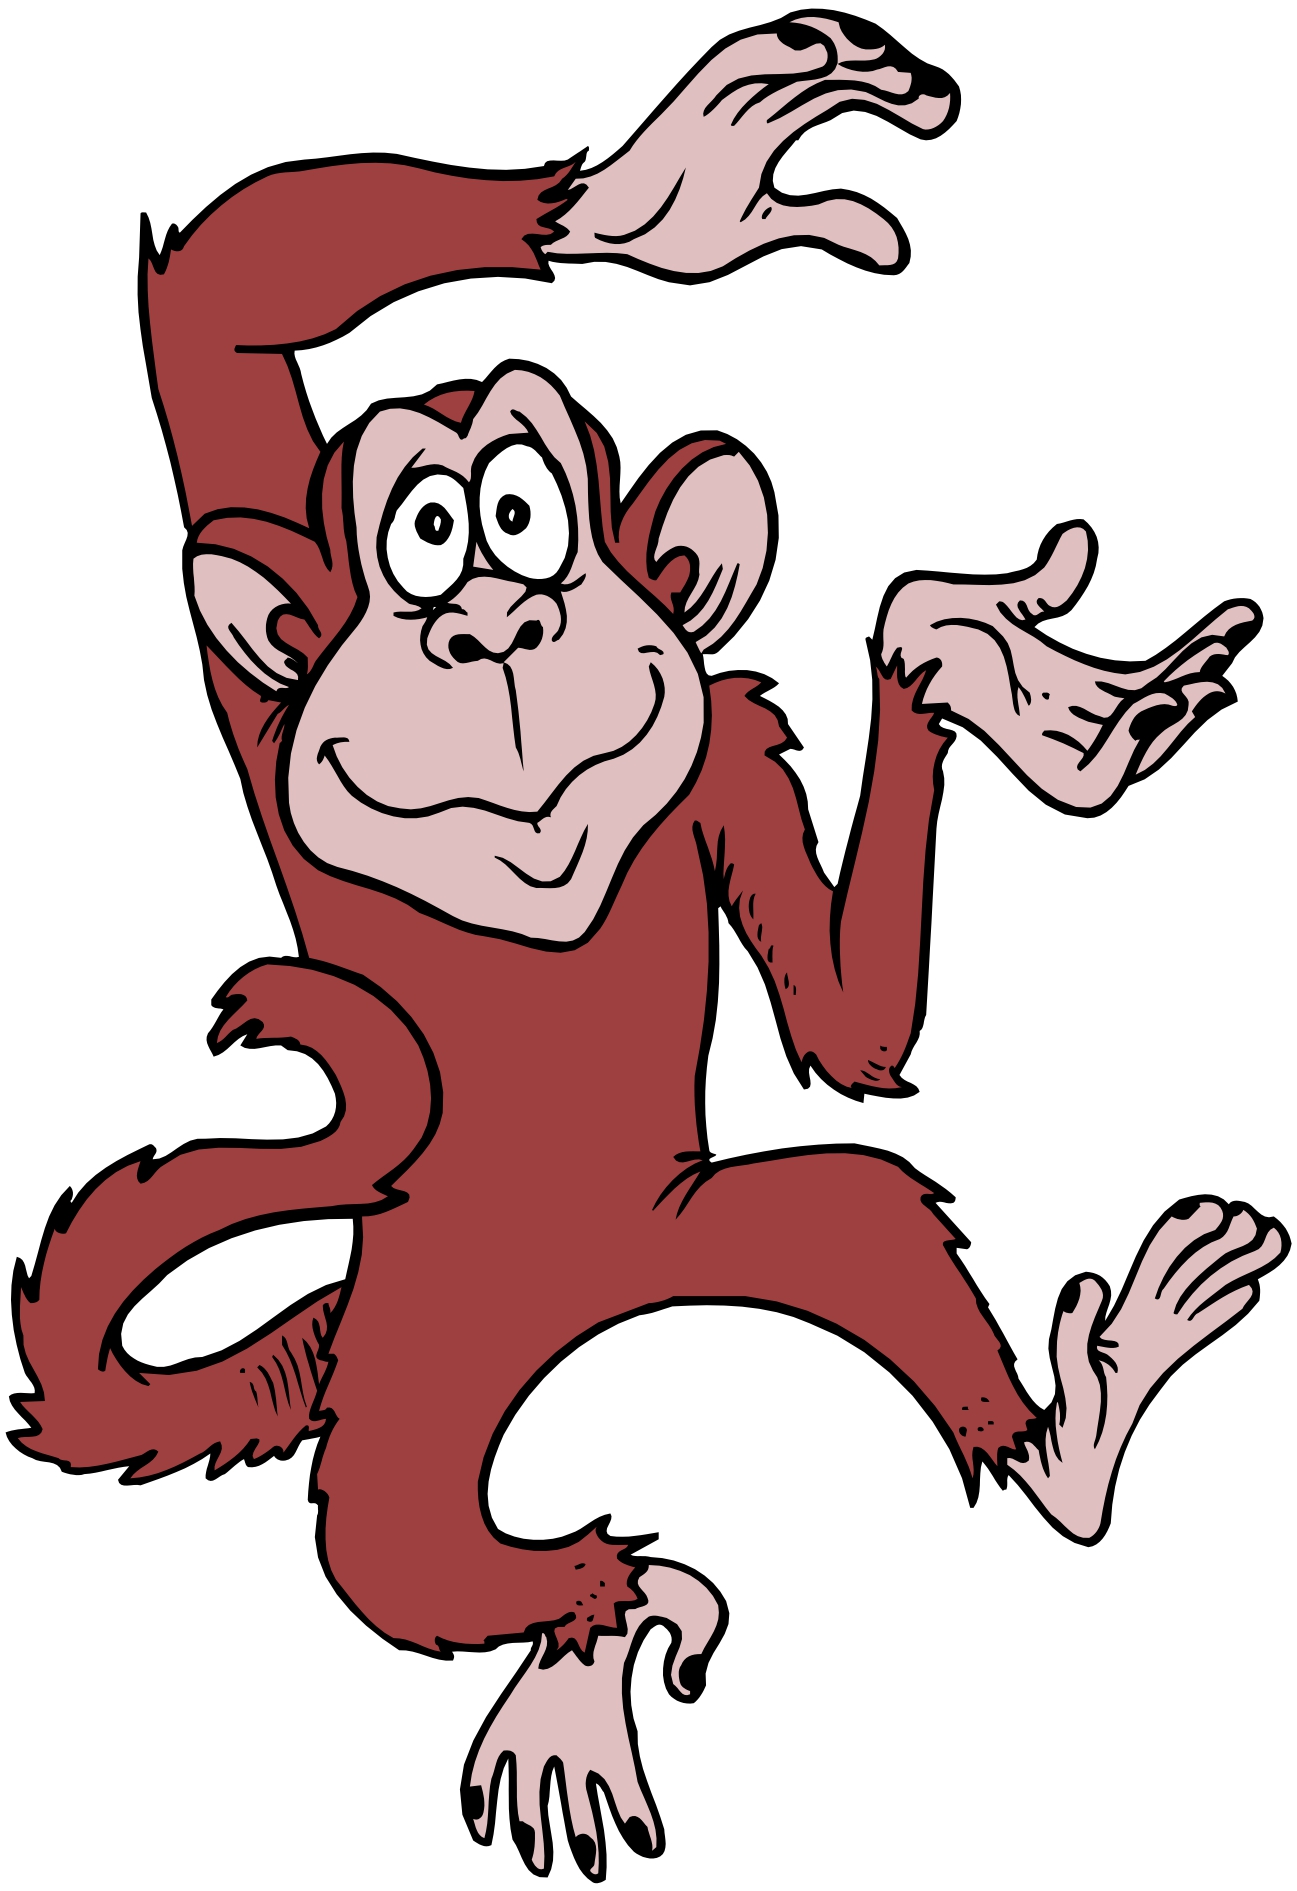 Picture Of Cartoon Monkeys - Clipart library